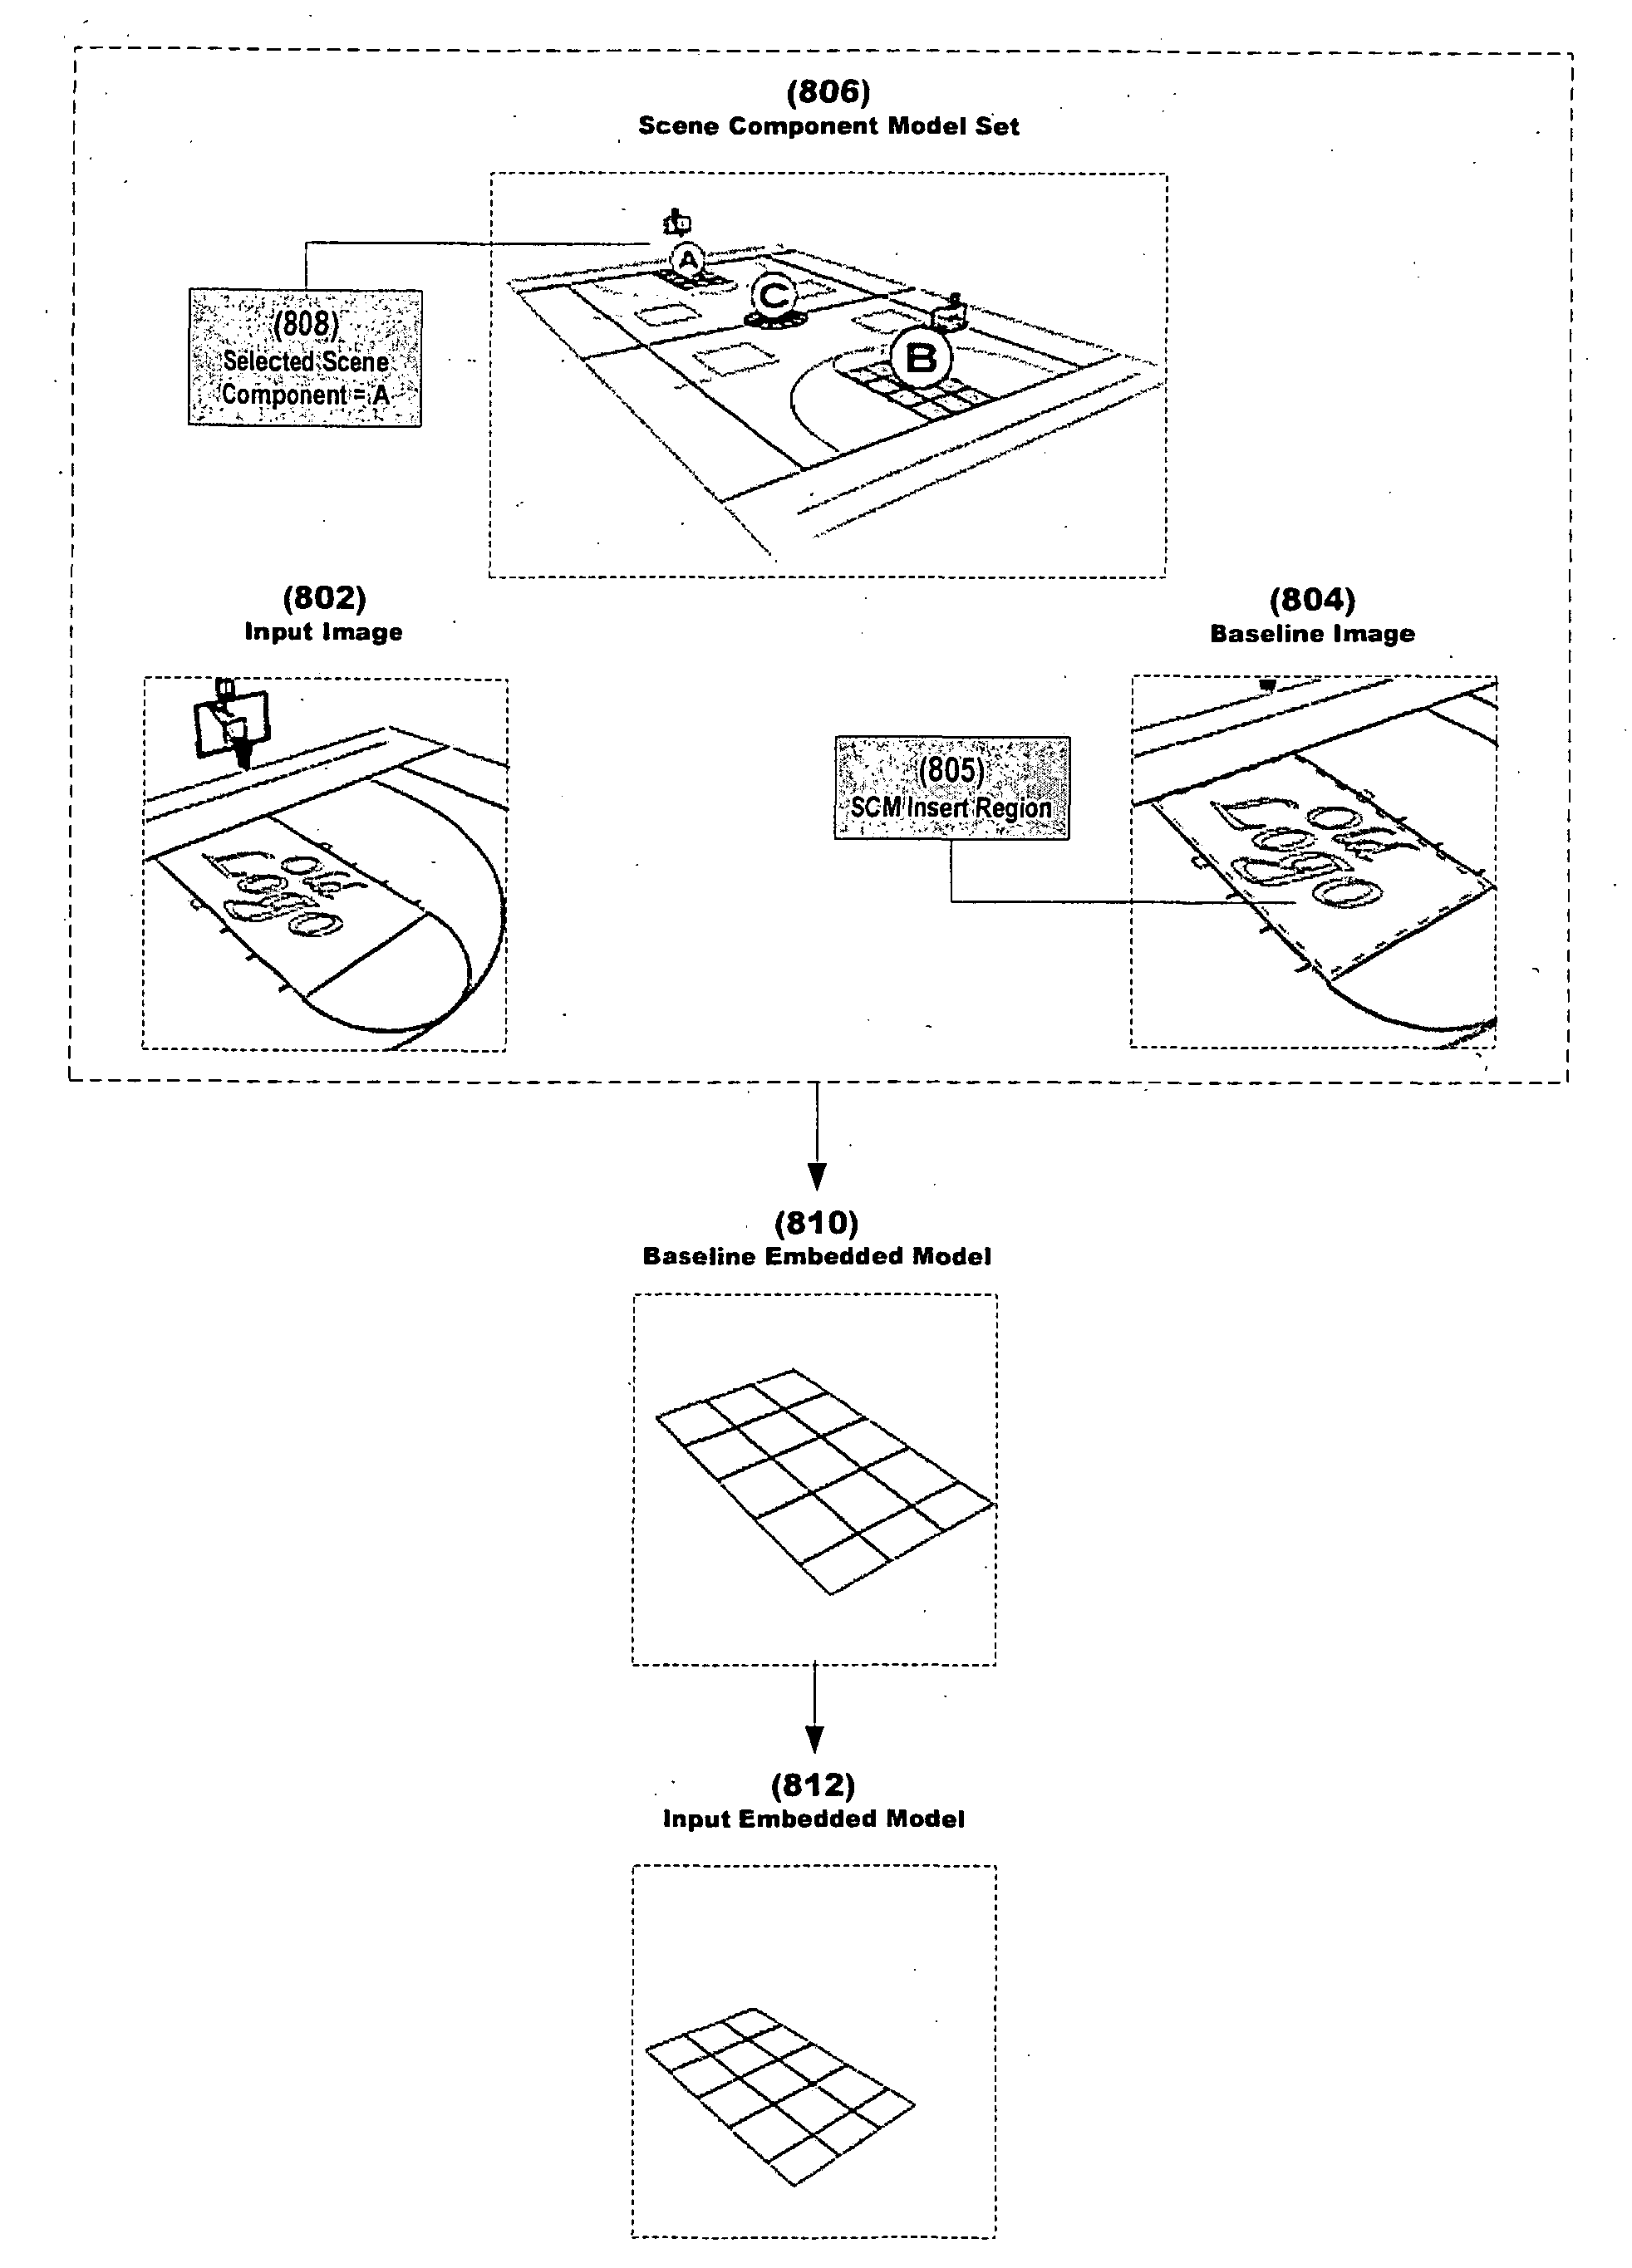 System and method for inserting content into an image sequence